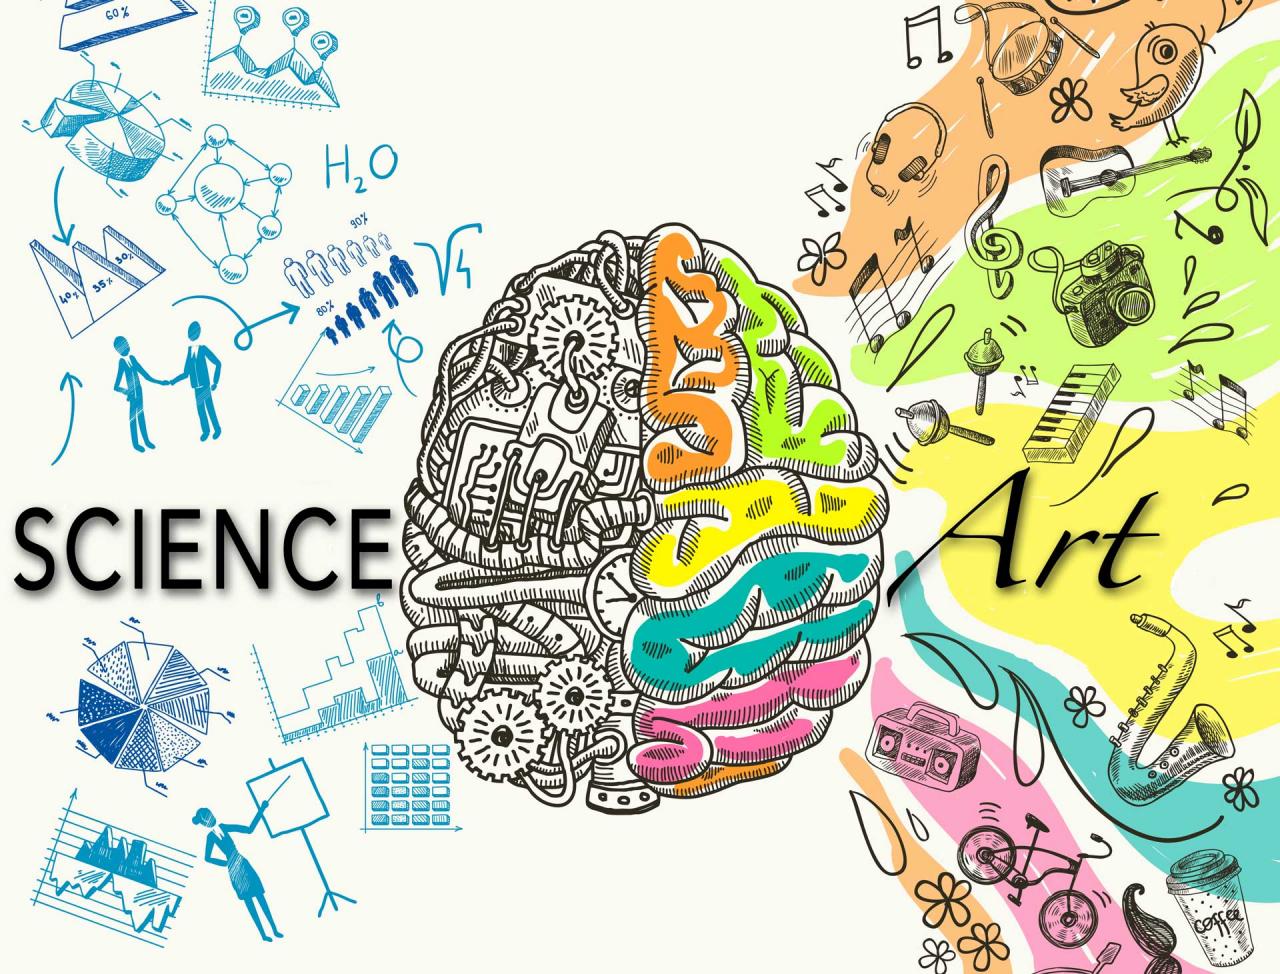 Is marketing management an art or a science